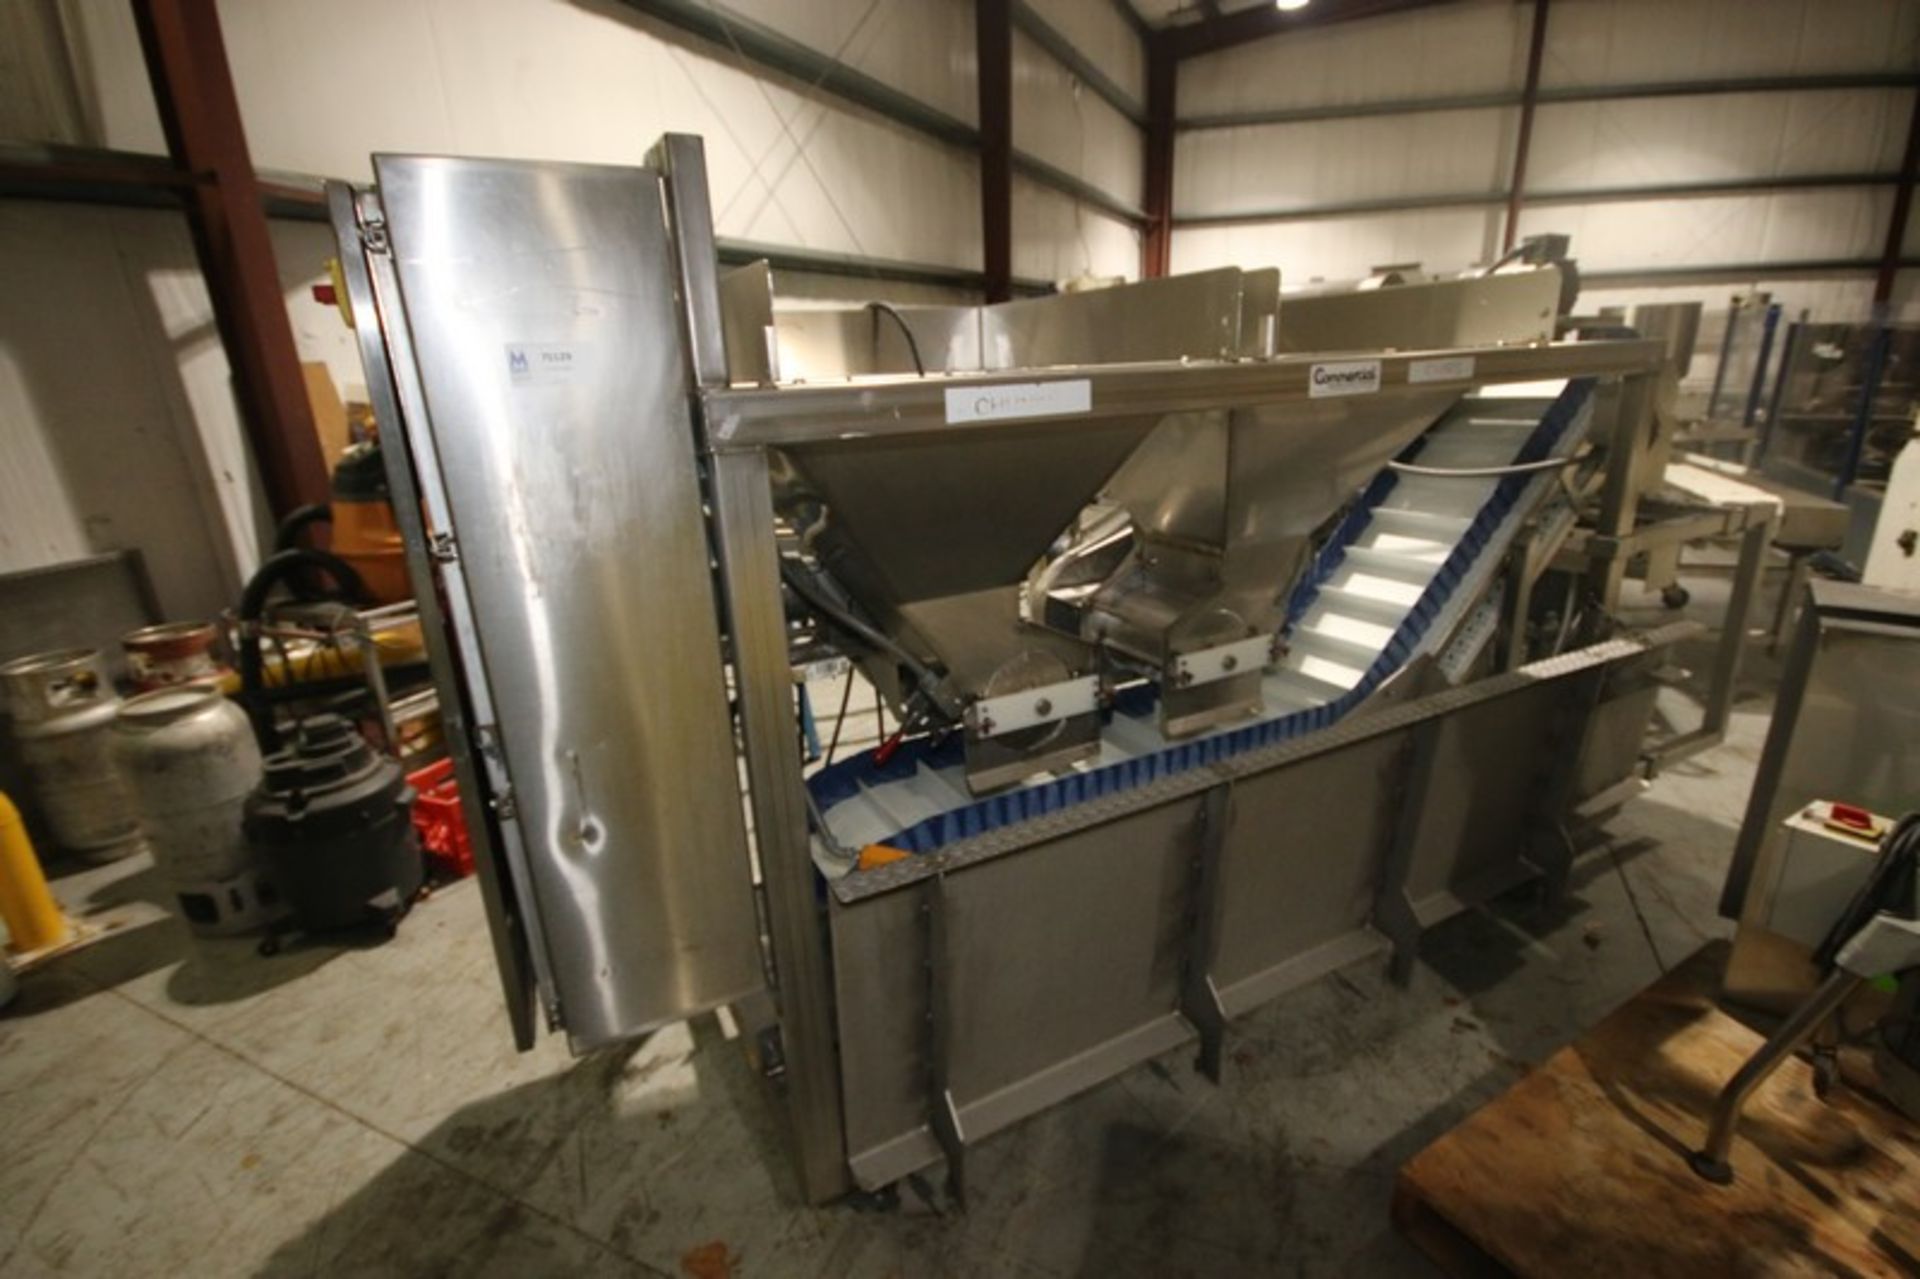 Commercial S/S Chips/Chunk Feeder Conveyor,S/N MU120310604, Job No.: 10604, with Flighted - Image 16 of 16